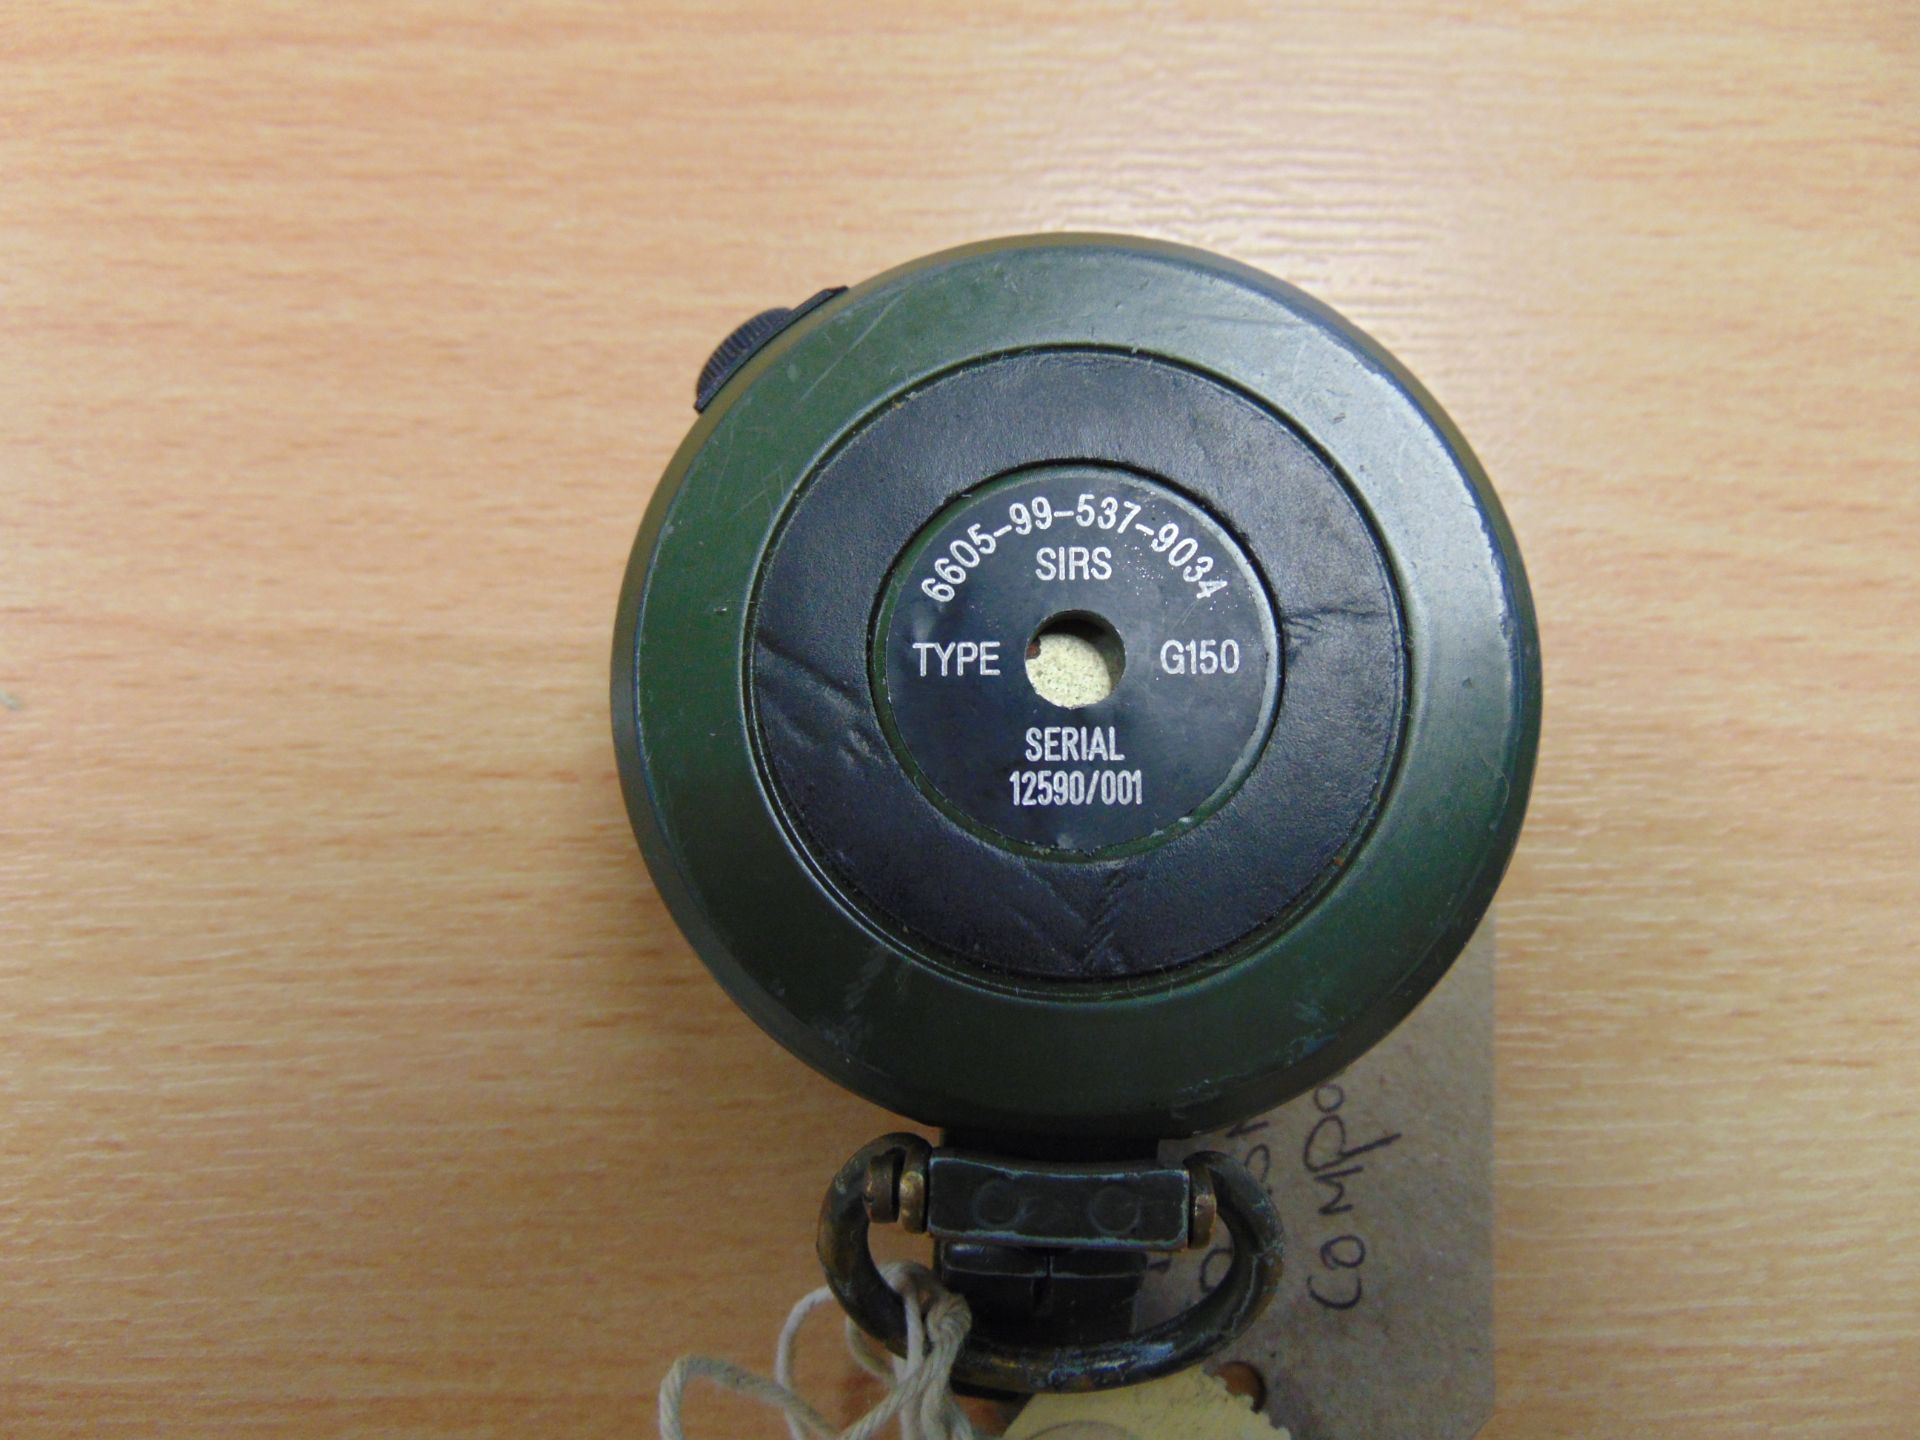 SIRS Type G150 British Army Brass Prismatic Compass - Image 4 of 5